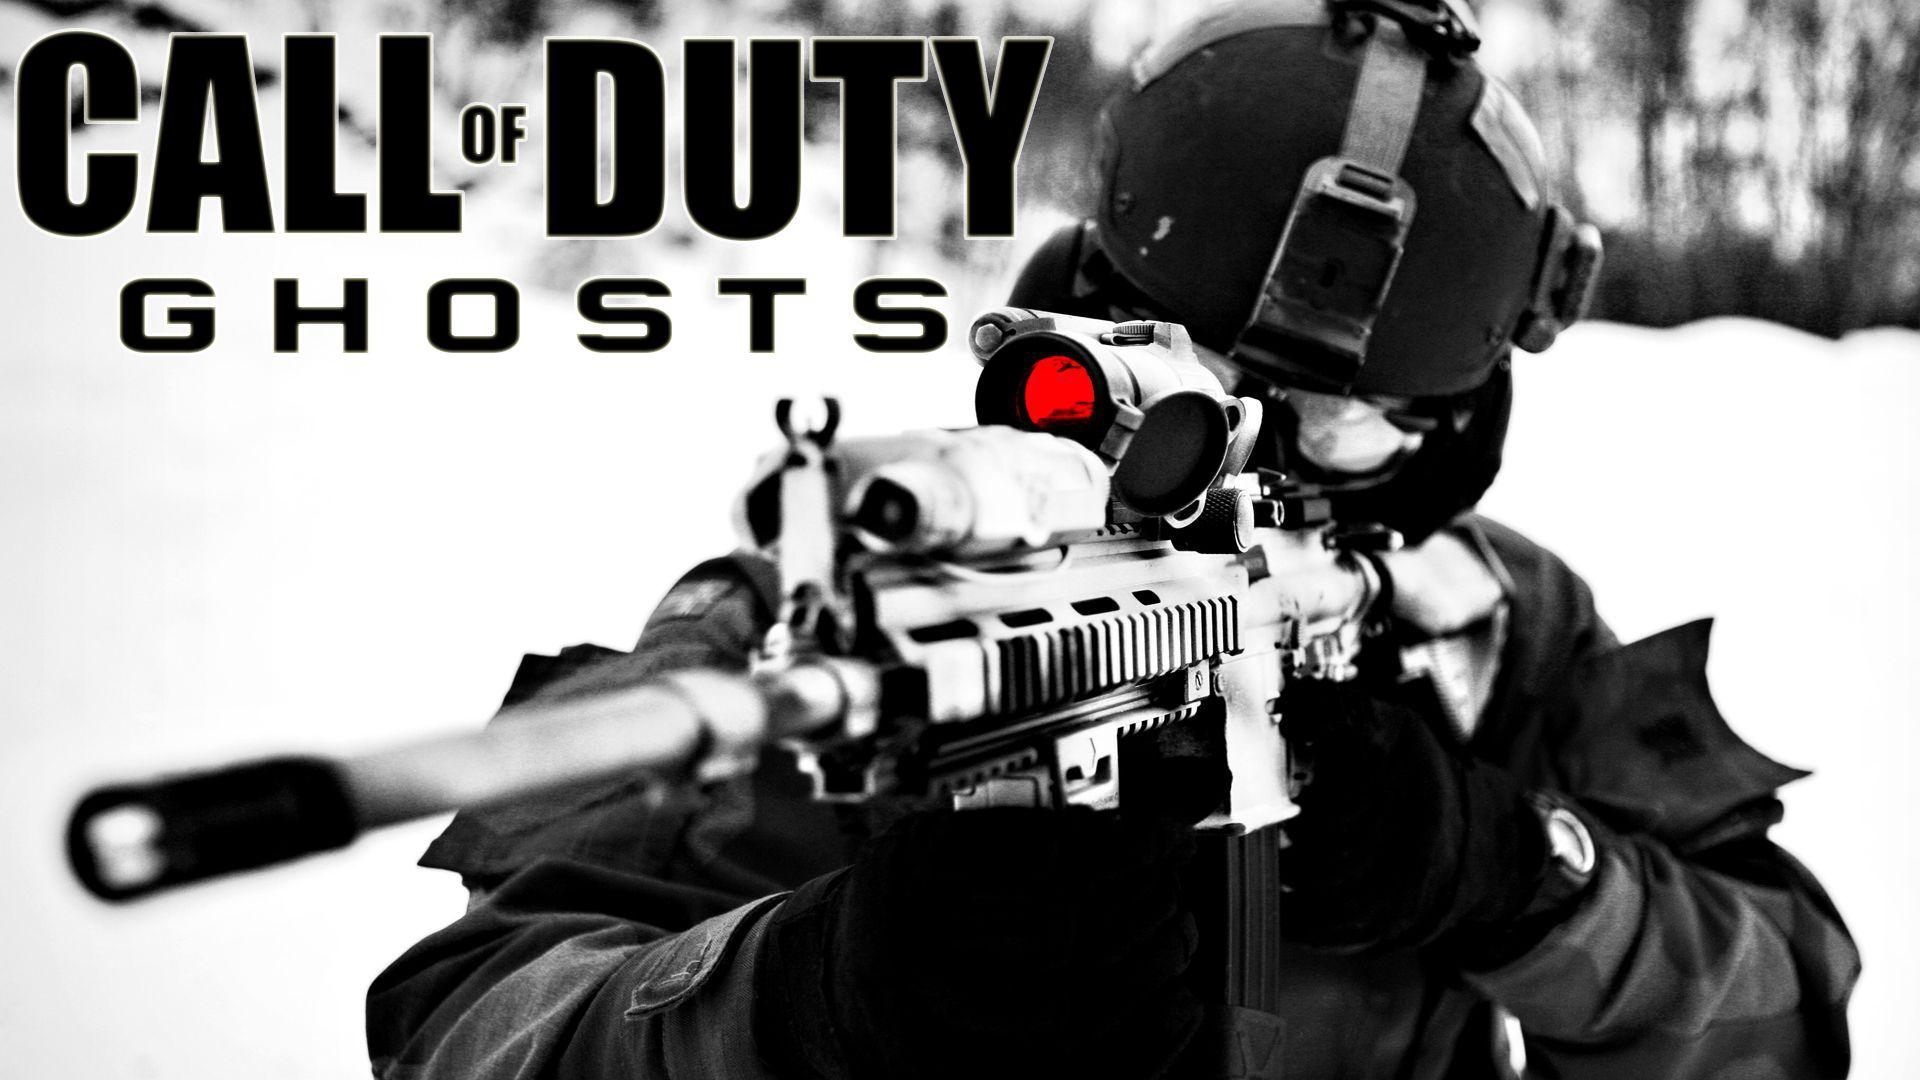 call of duty: ghosts the sniper wallpaper and image